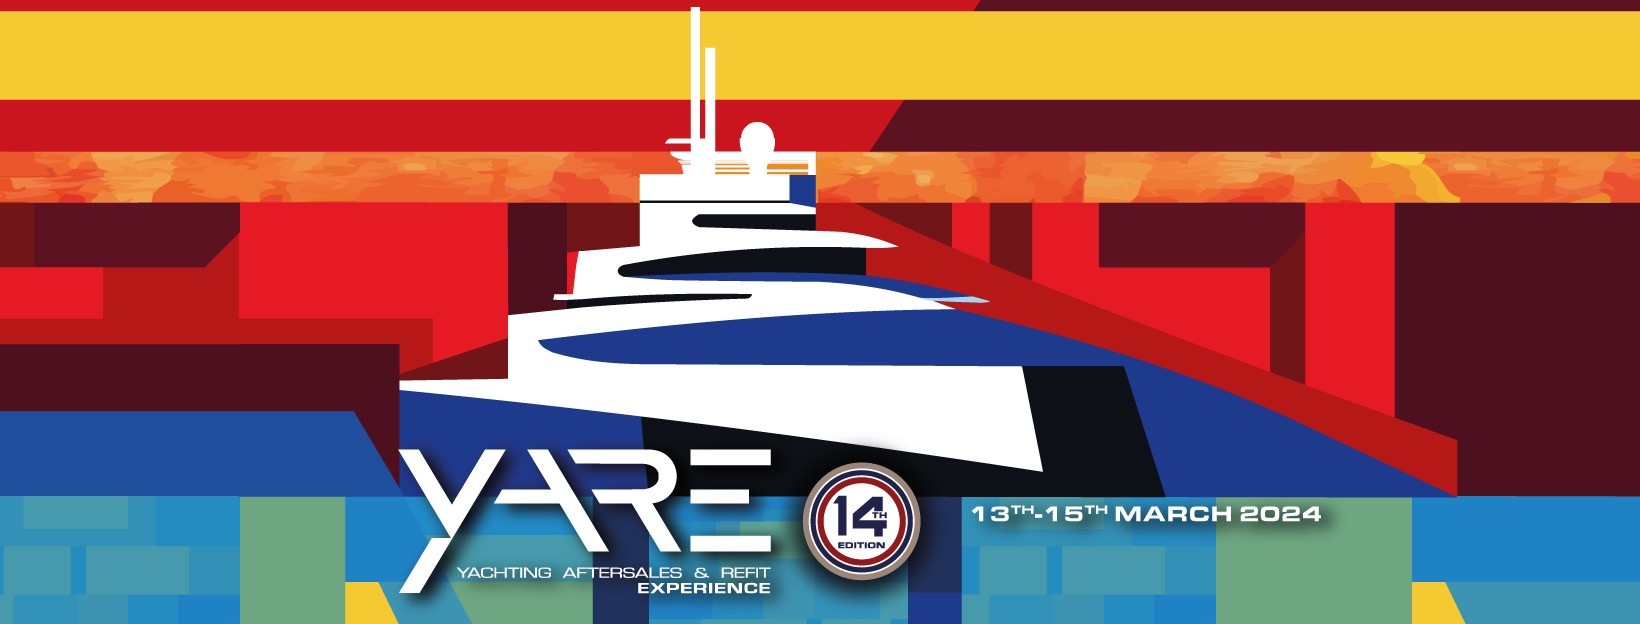 Yare: Yachting Aftersales & Refit Experience